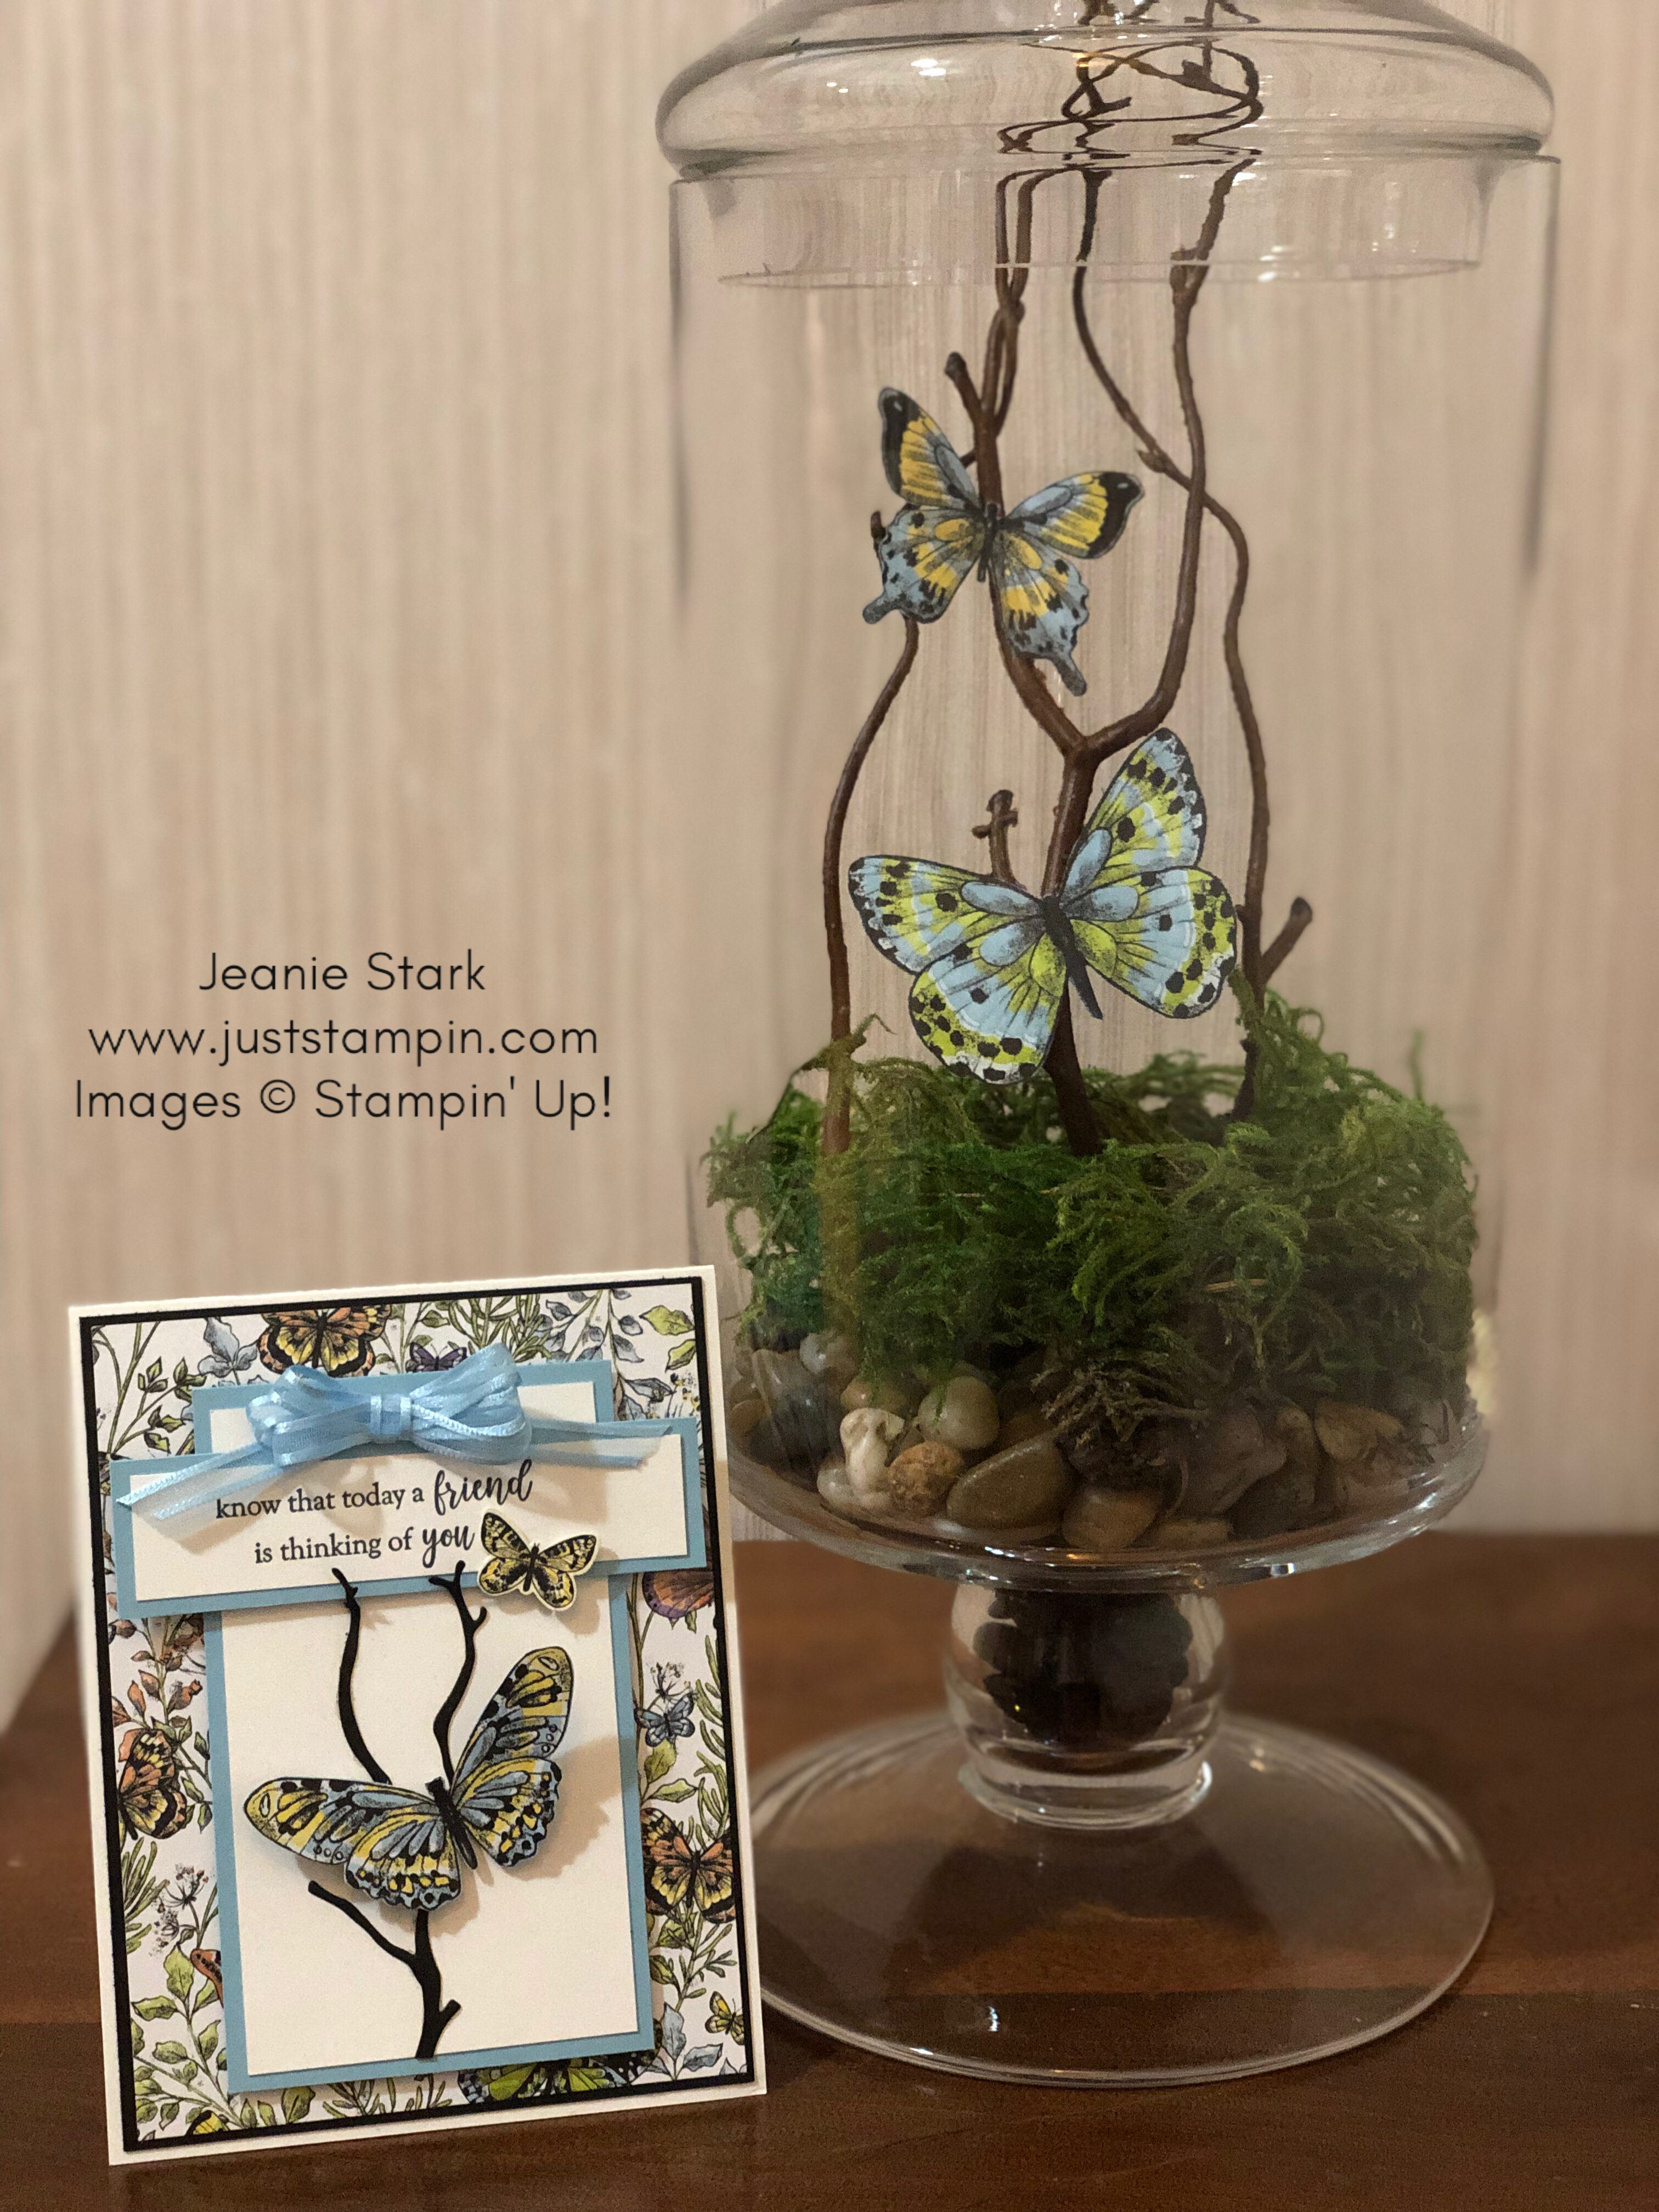 Stampin Up friend card and gift idea using Botanical Butterfly Designer Series Paper and Part of My Story Stamp Set - Jeanie Stark StampinUp